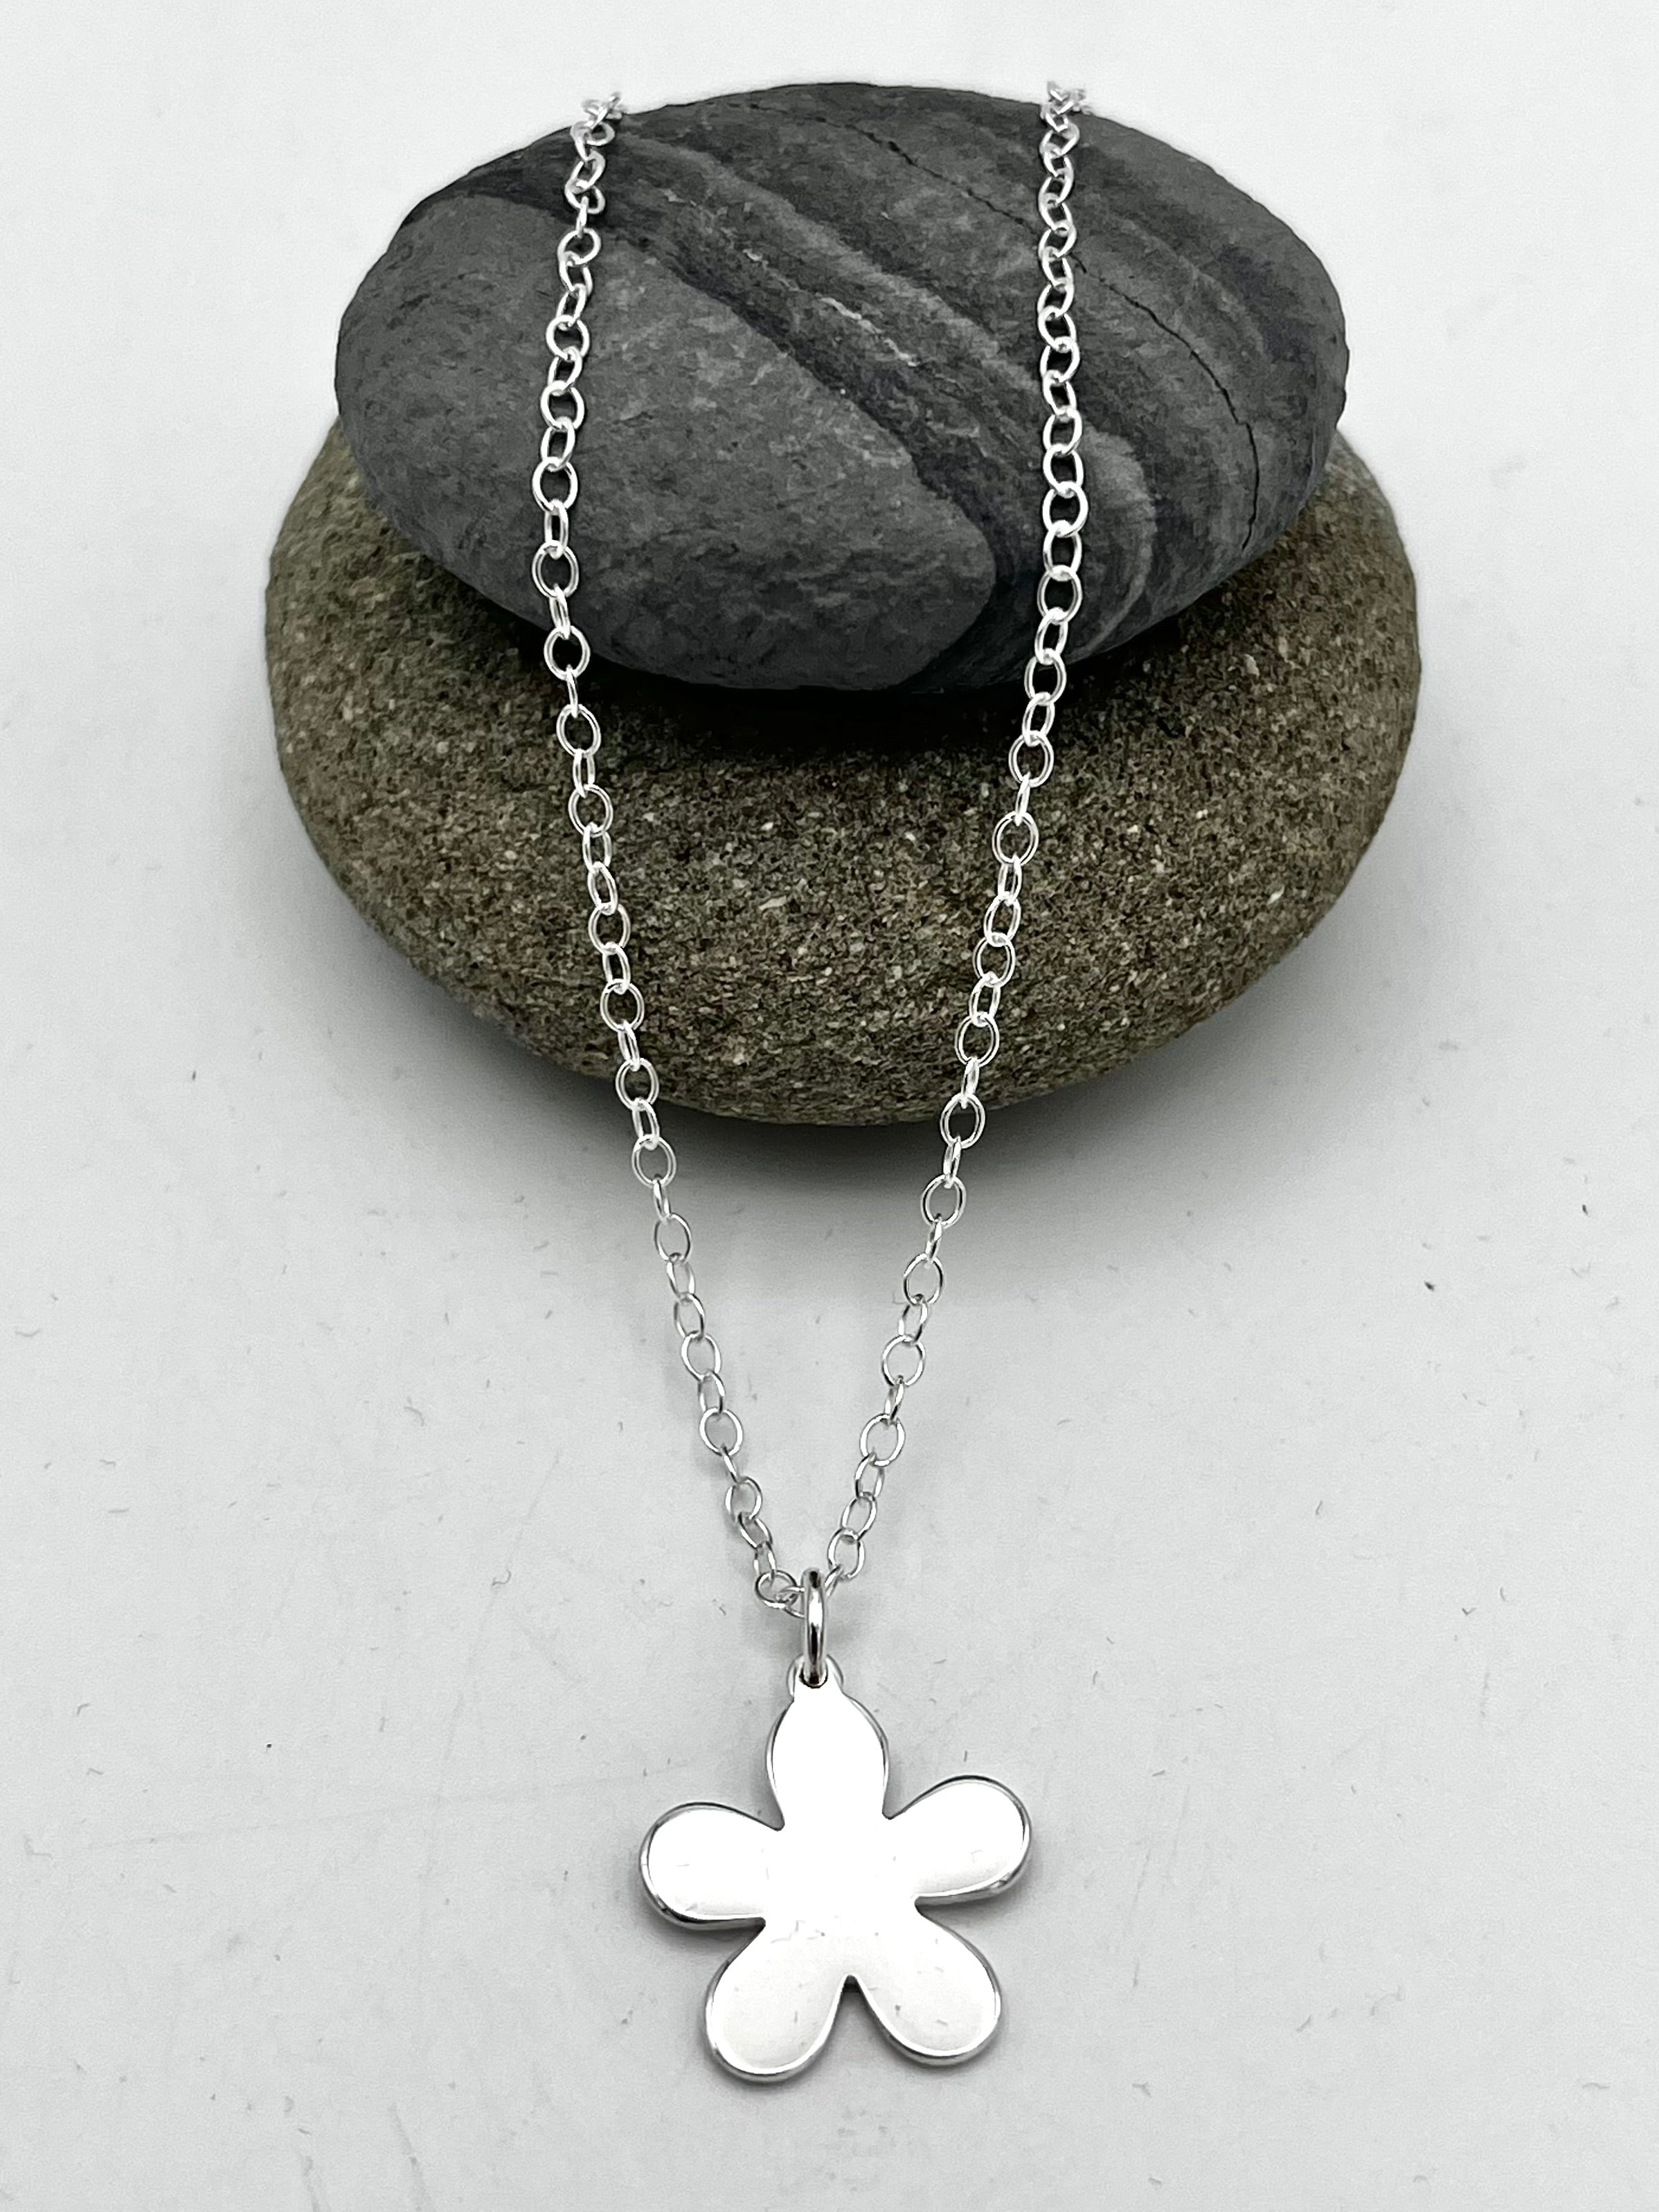 Single flower pendant 15mm wide polished finish on 16" trace chain